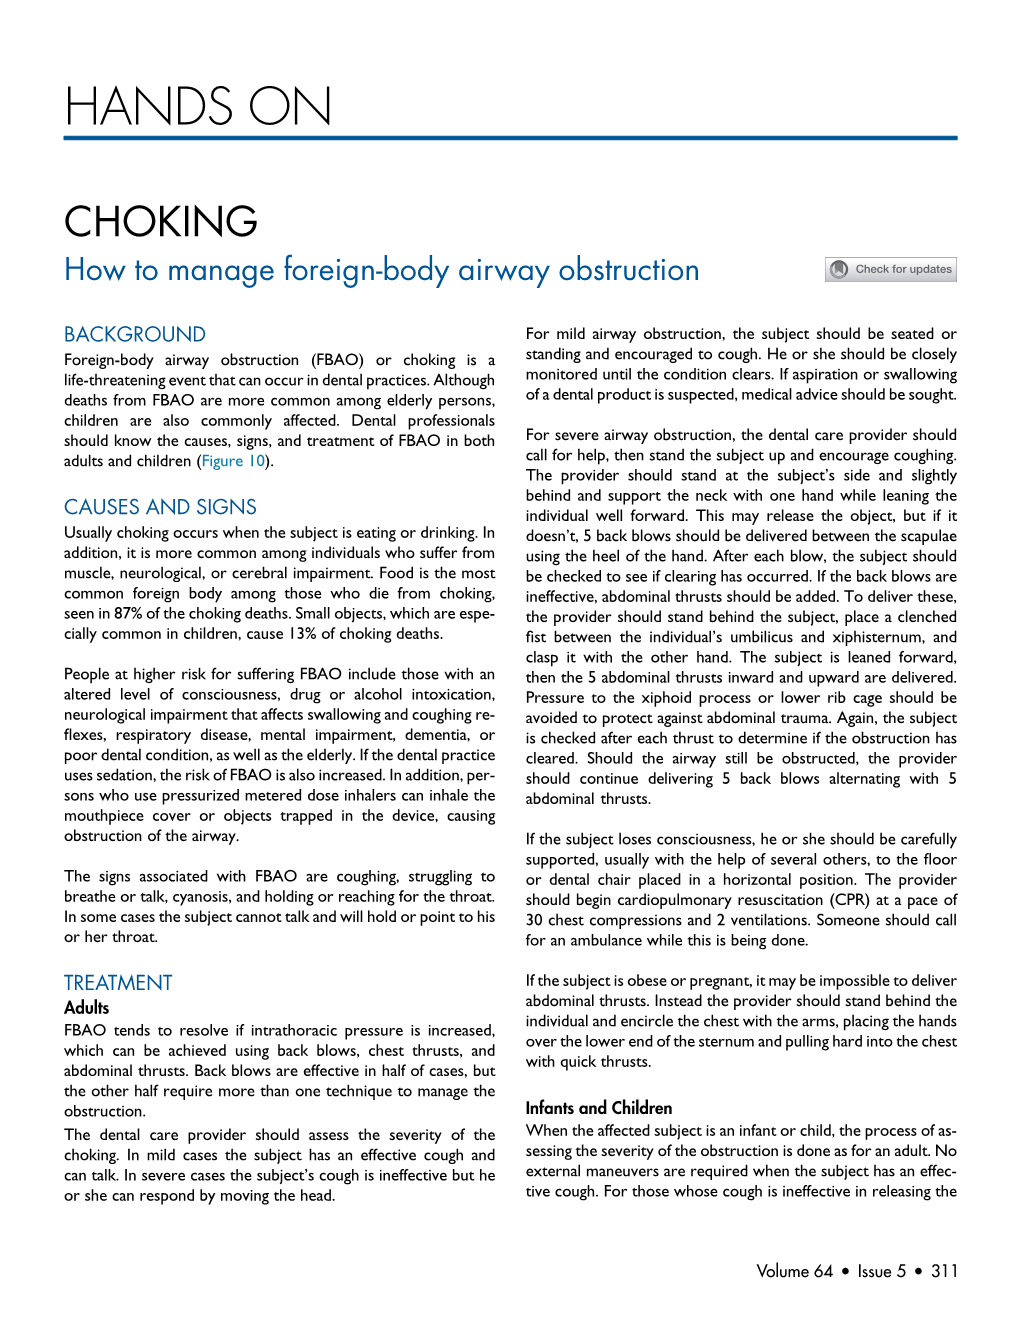 CHOKING How to Manage Foreign-Body Airway Obstruction